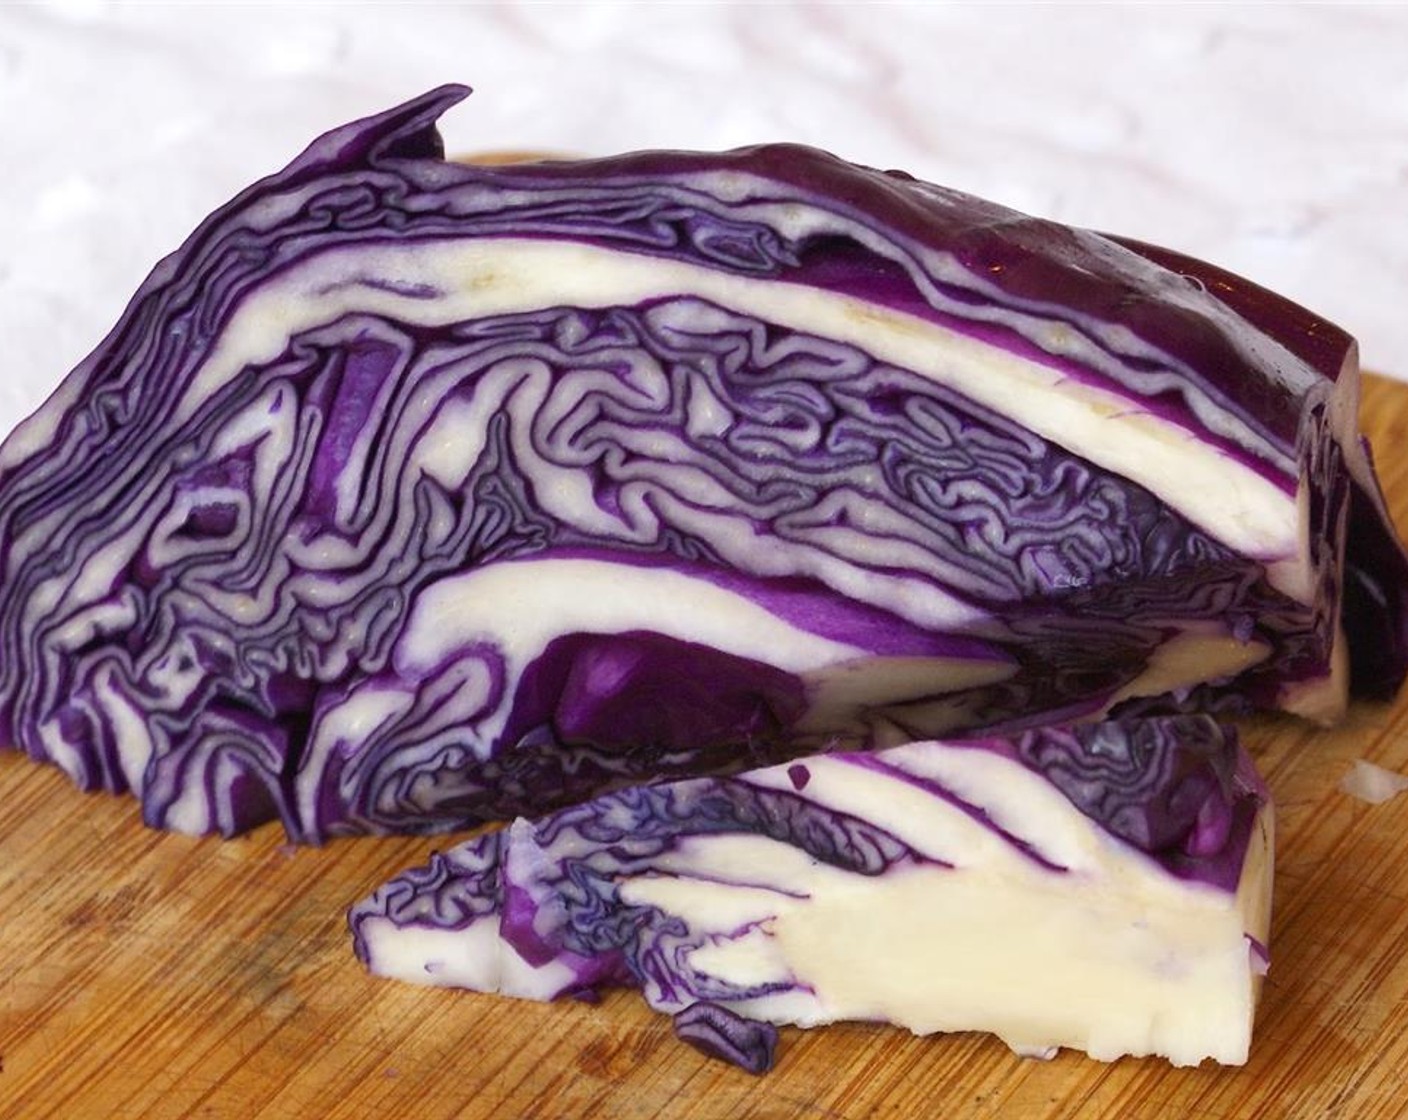 step 2 Cut Red Cabbage (1) into quarters. Remove thick white stem at the base of each quarter.